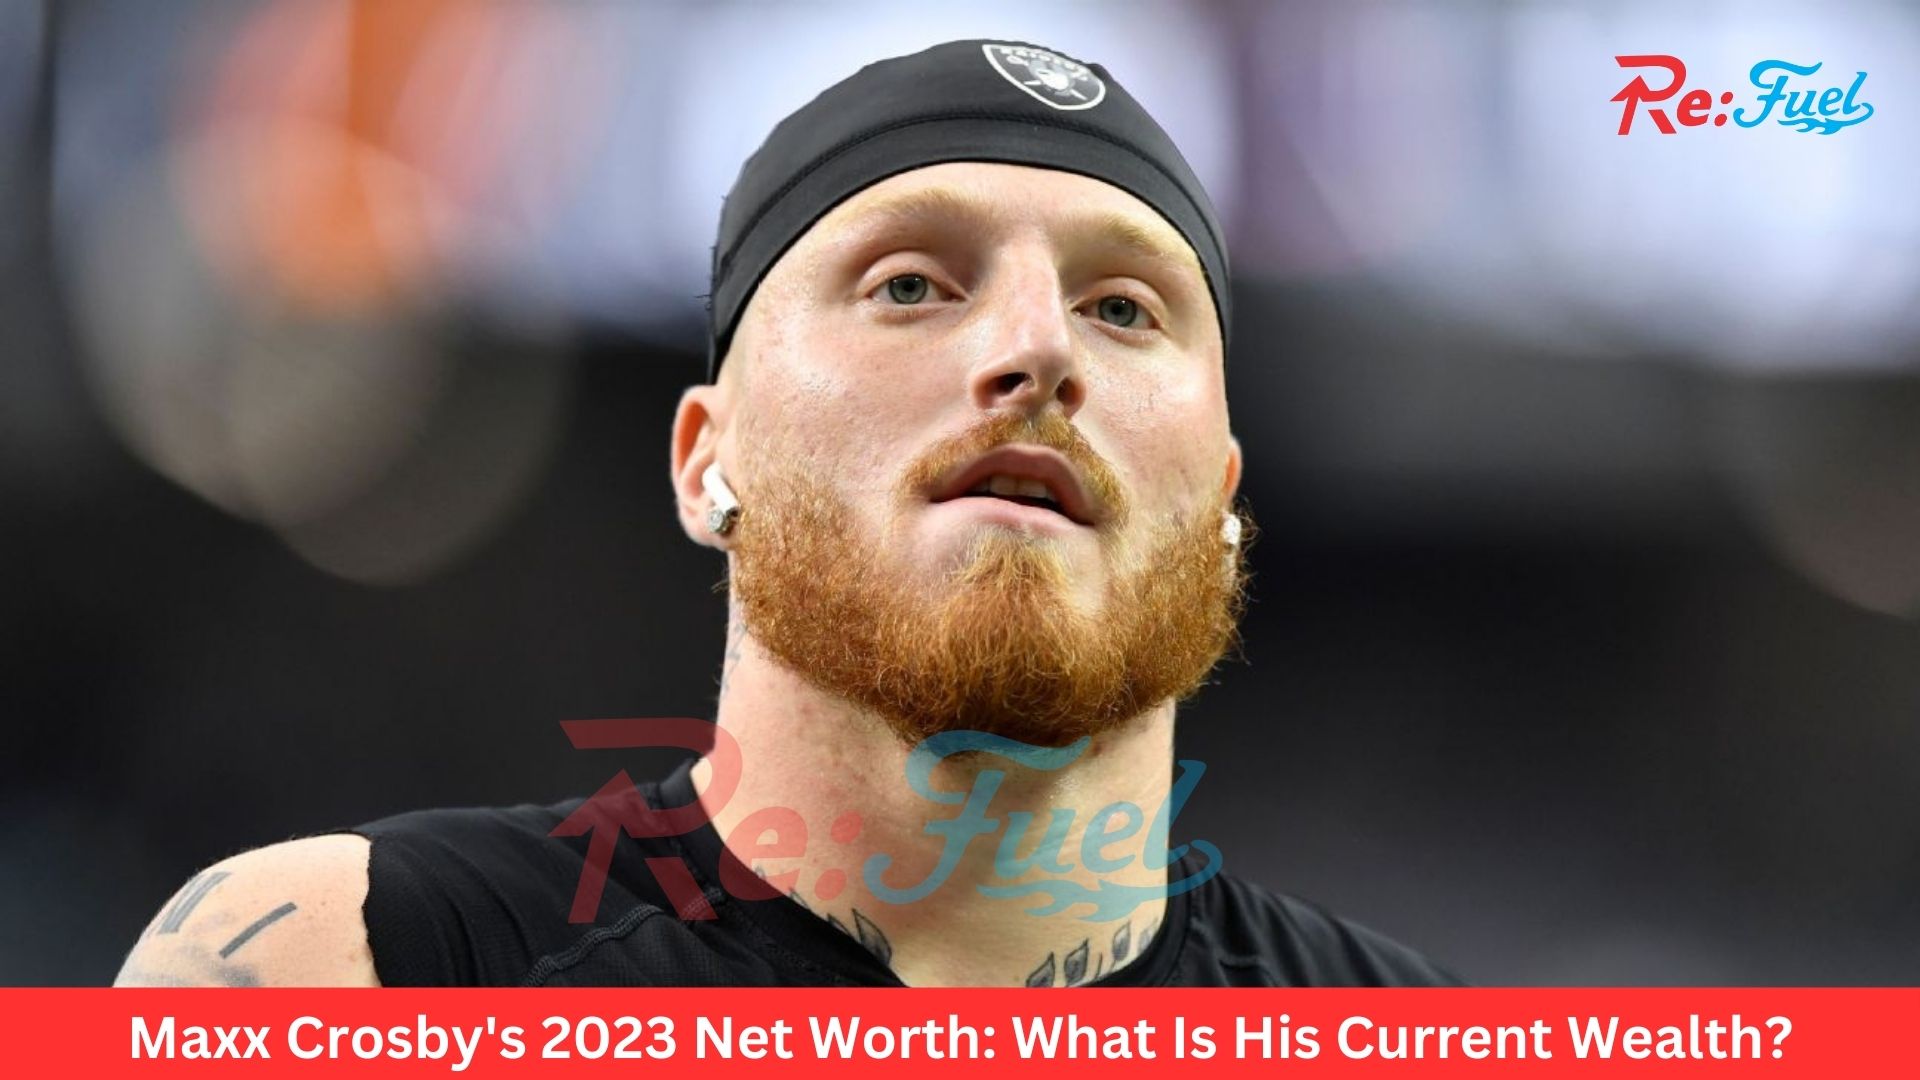 Maxx Crosby's 2023 Net Worth: What Is His Current Wealth?